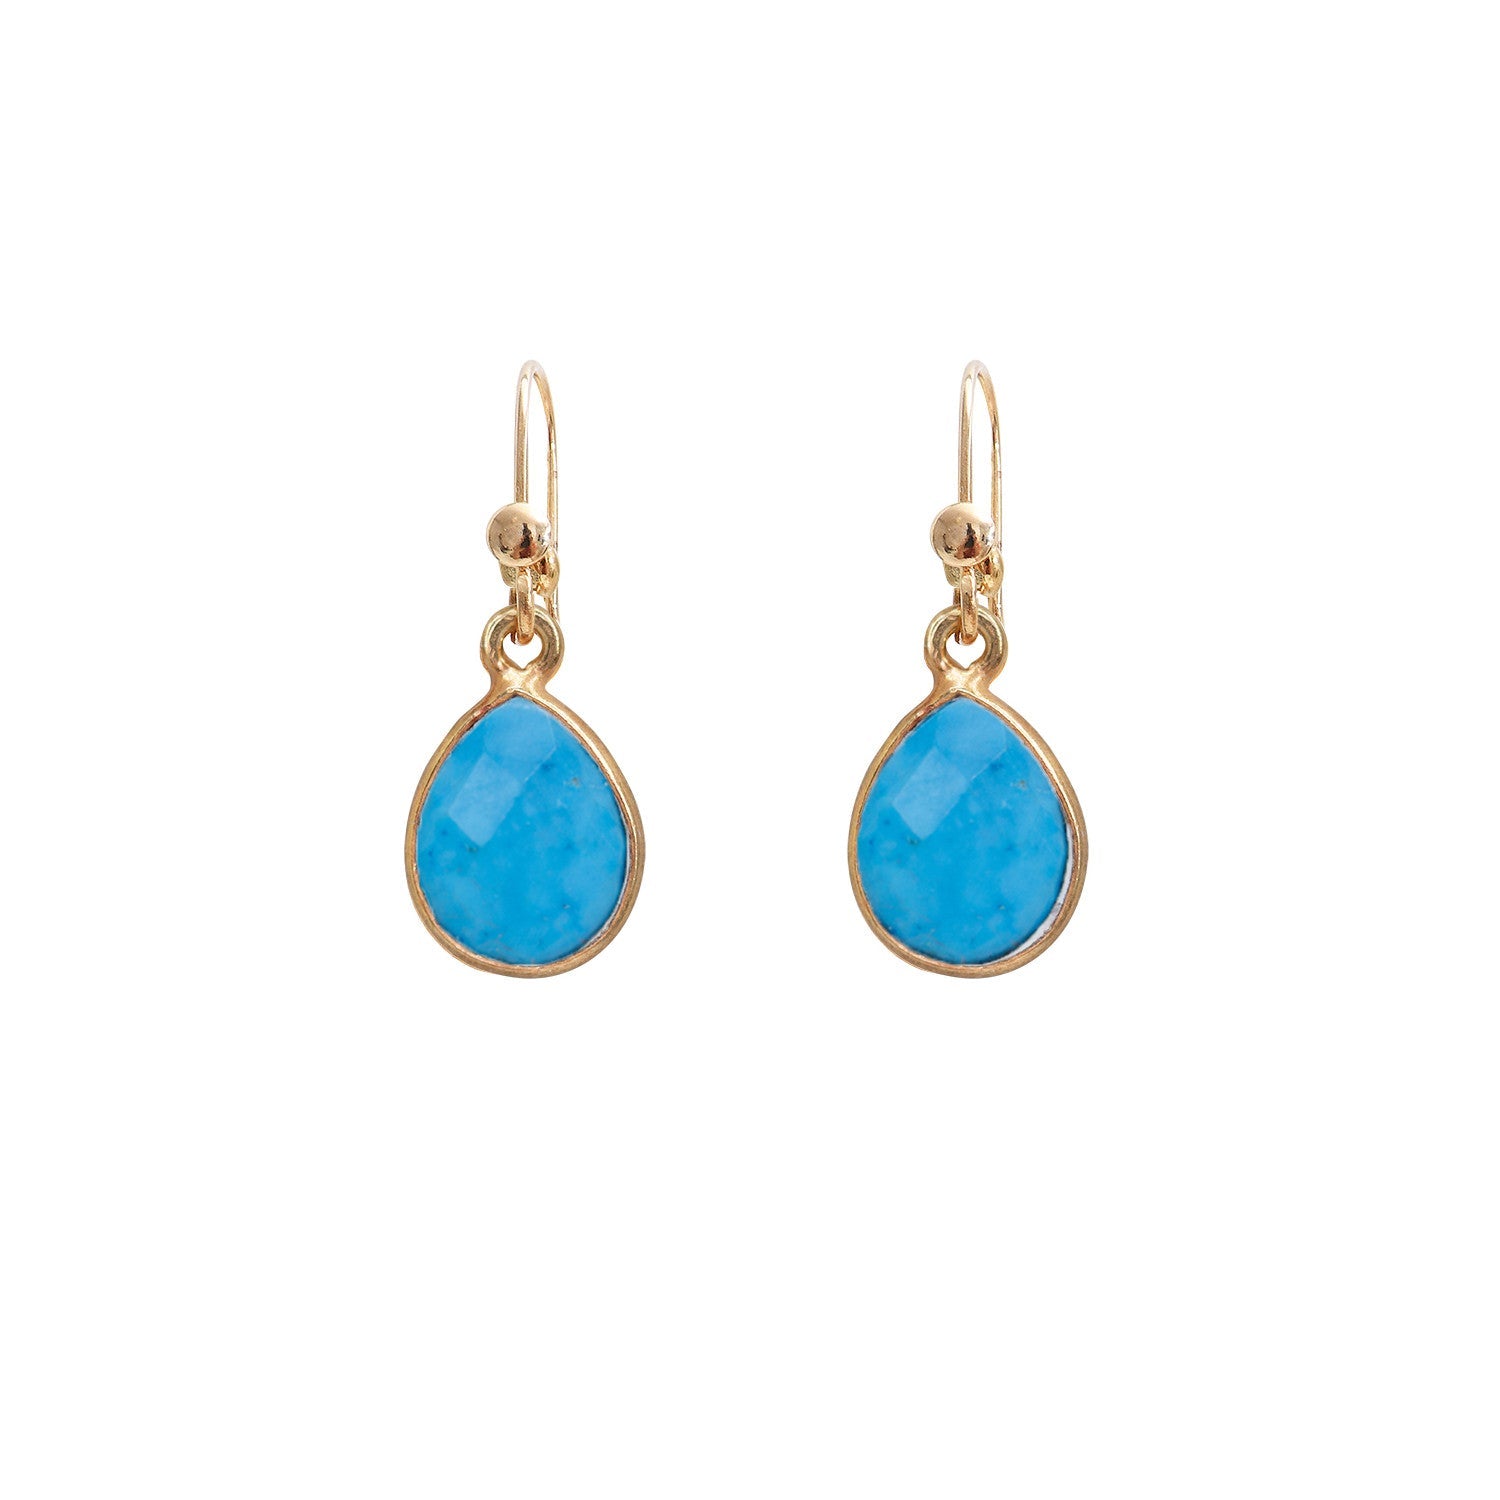 Turquoise Color Stone earrings